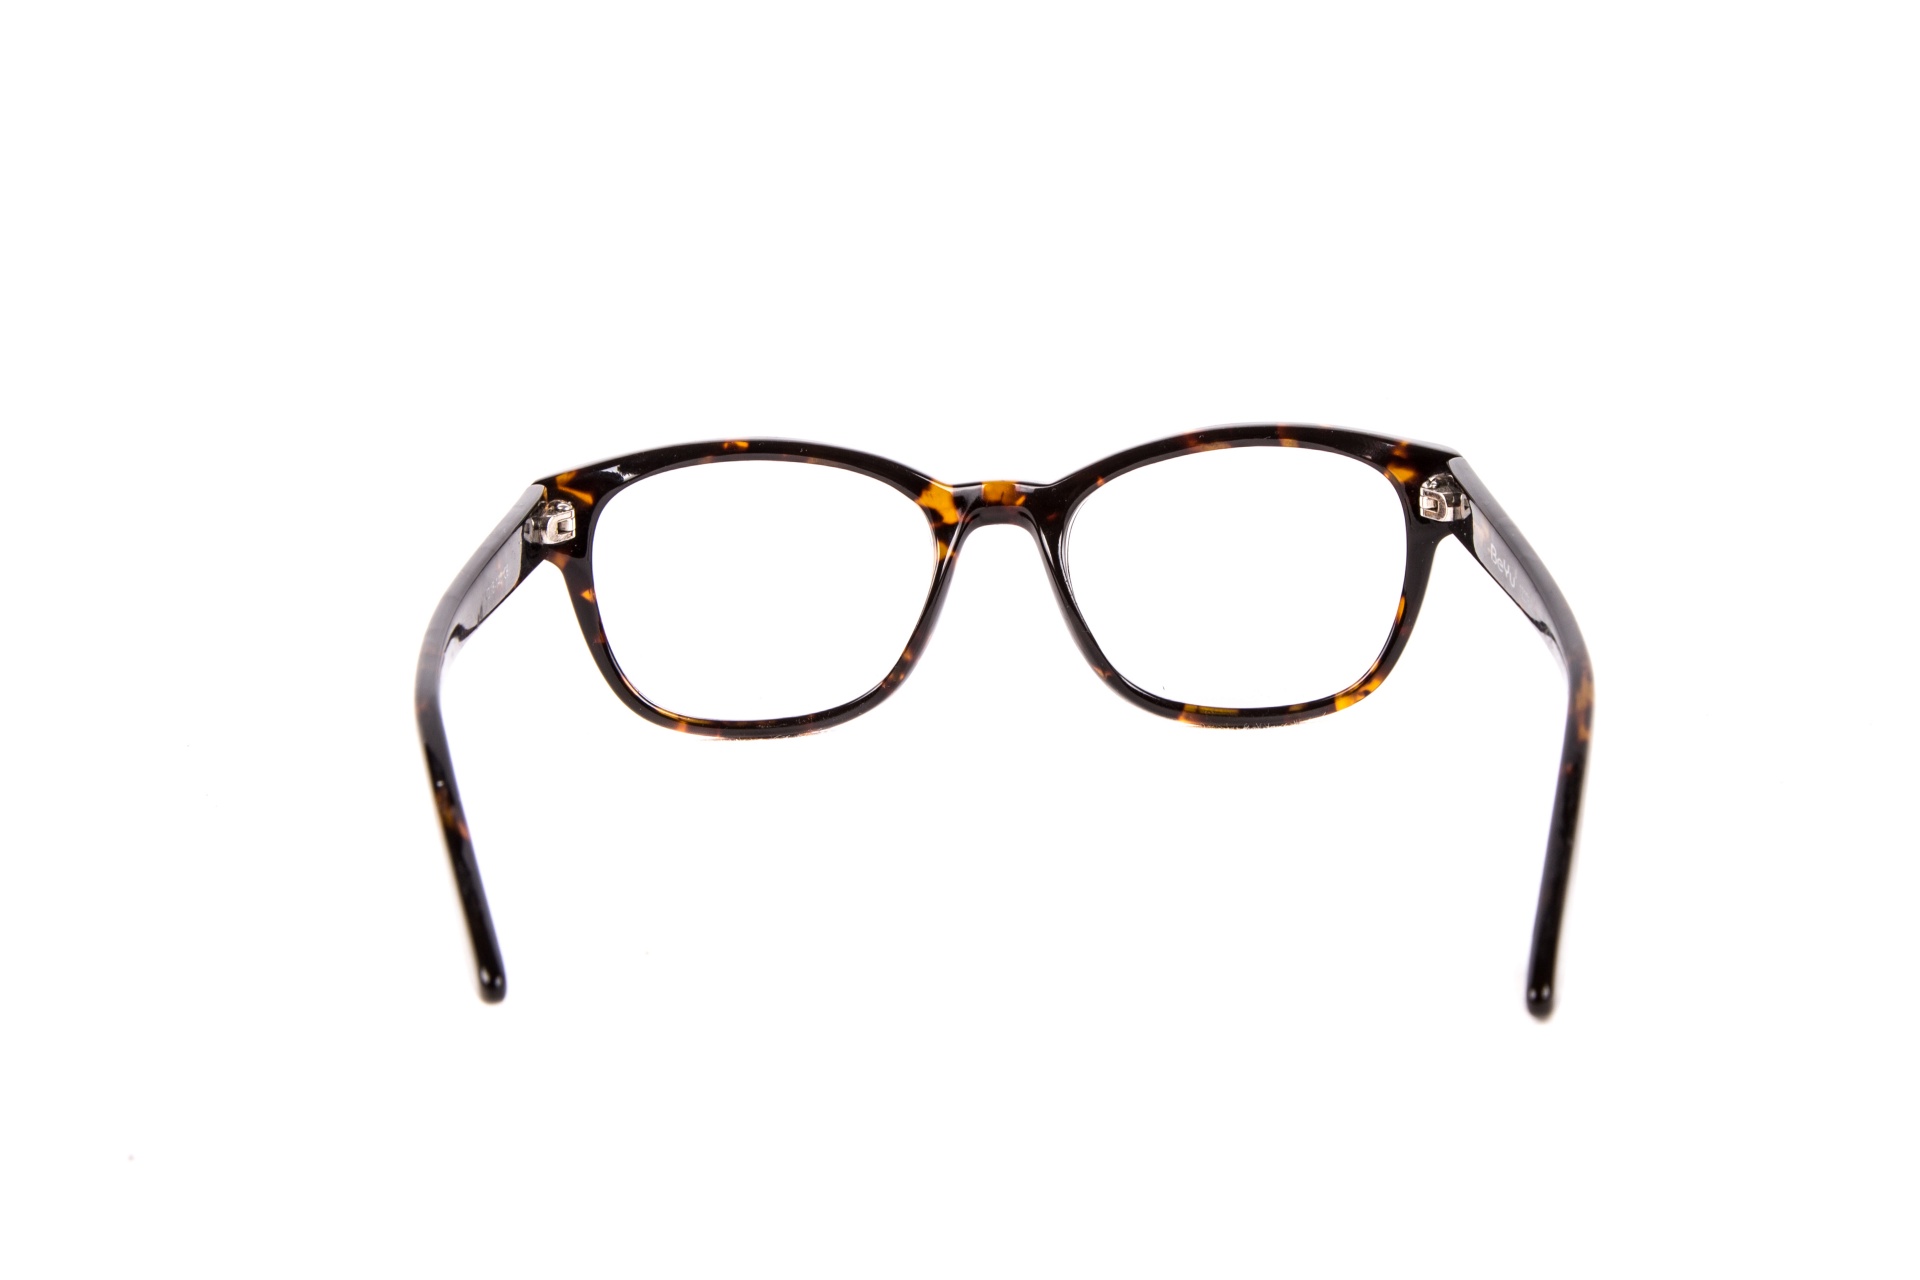 Download free photo of Eyeglasses,glasses,optical,white,classic - from ...